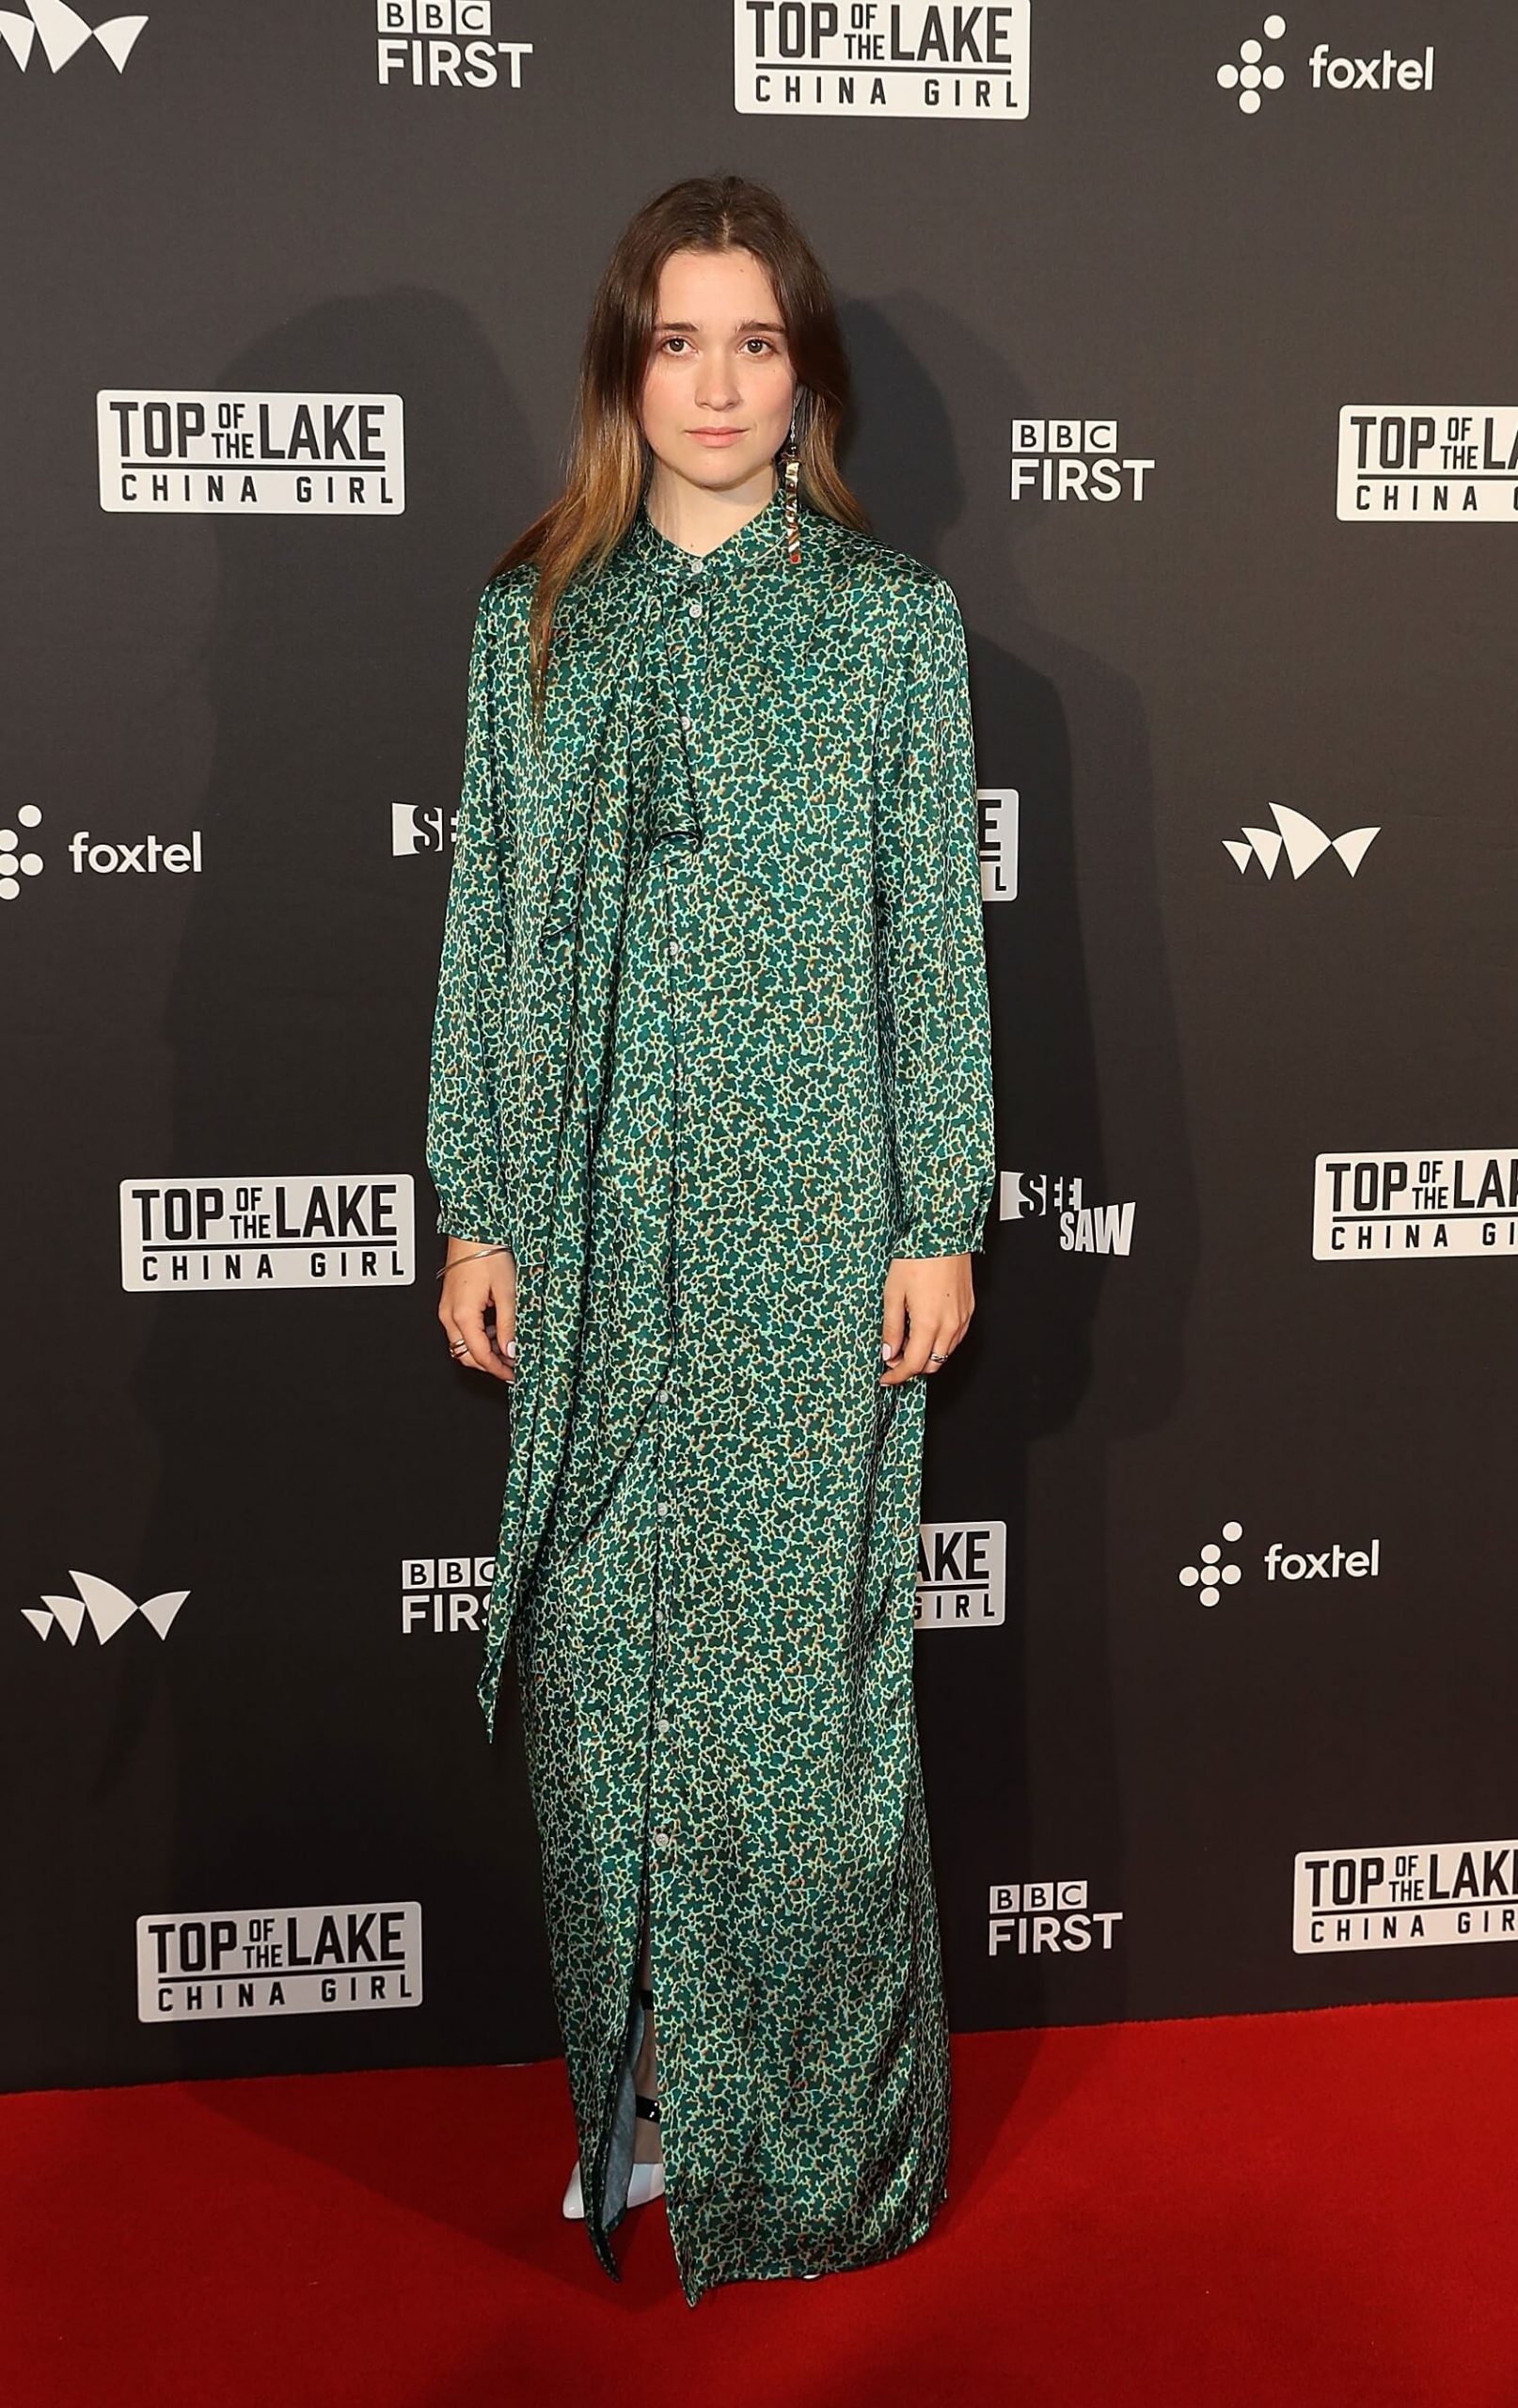 Alice Englert Looked Ravishing In A Floral Maxi Dress At The ‘Top of the Lake: China Girl Sydney Premiere In Australia